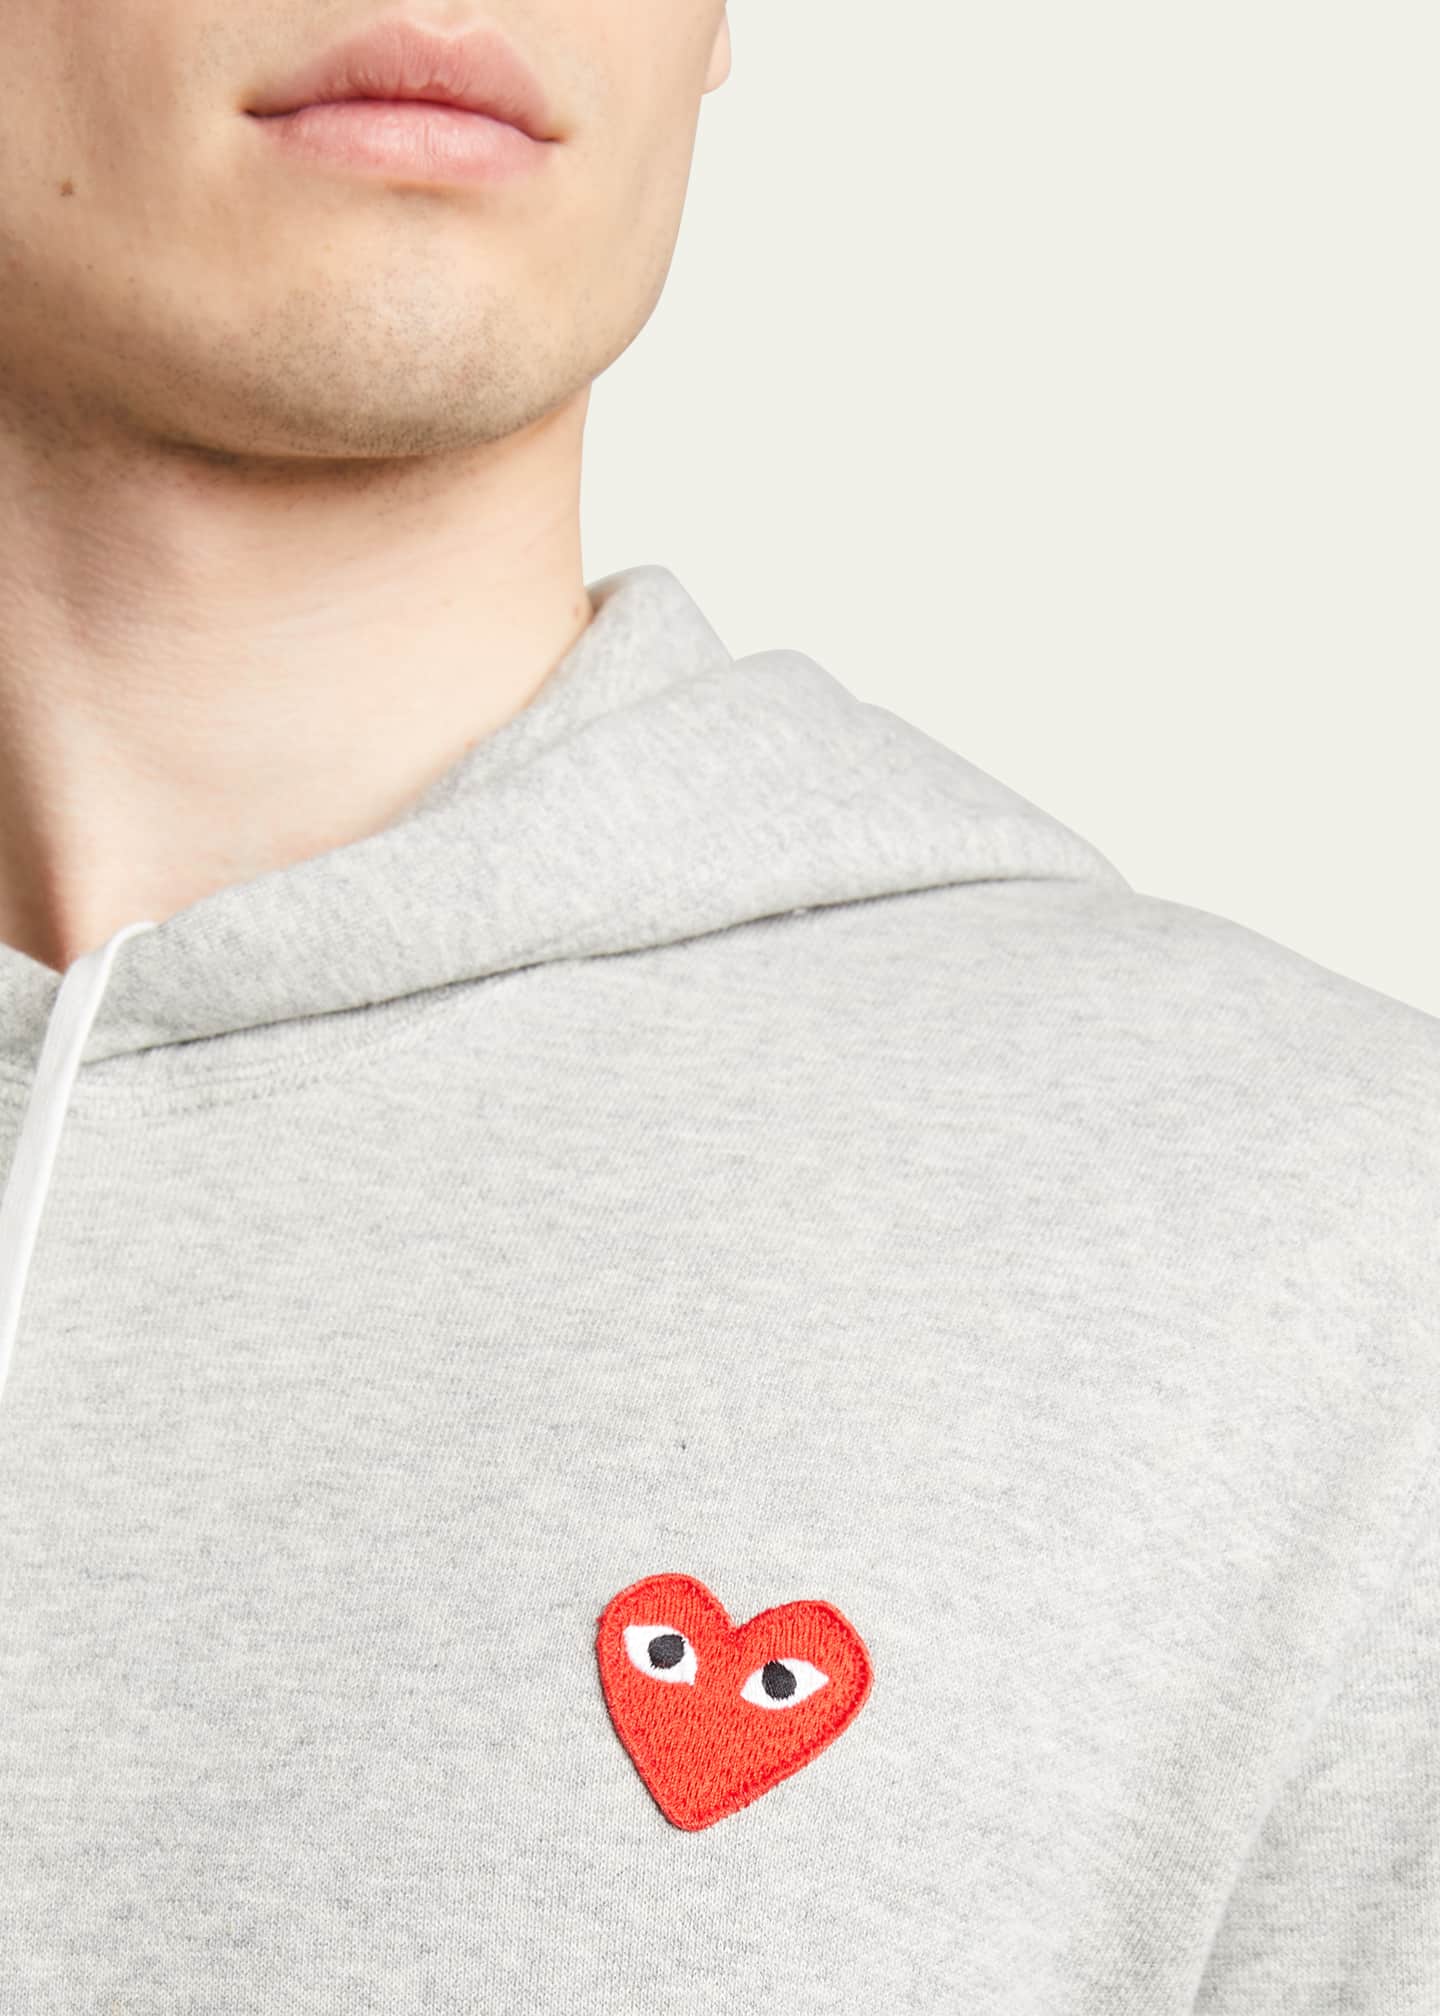 Comme des Garcons Men's Small Heart Pullover Hoodie Image 5 of 5